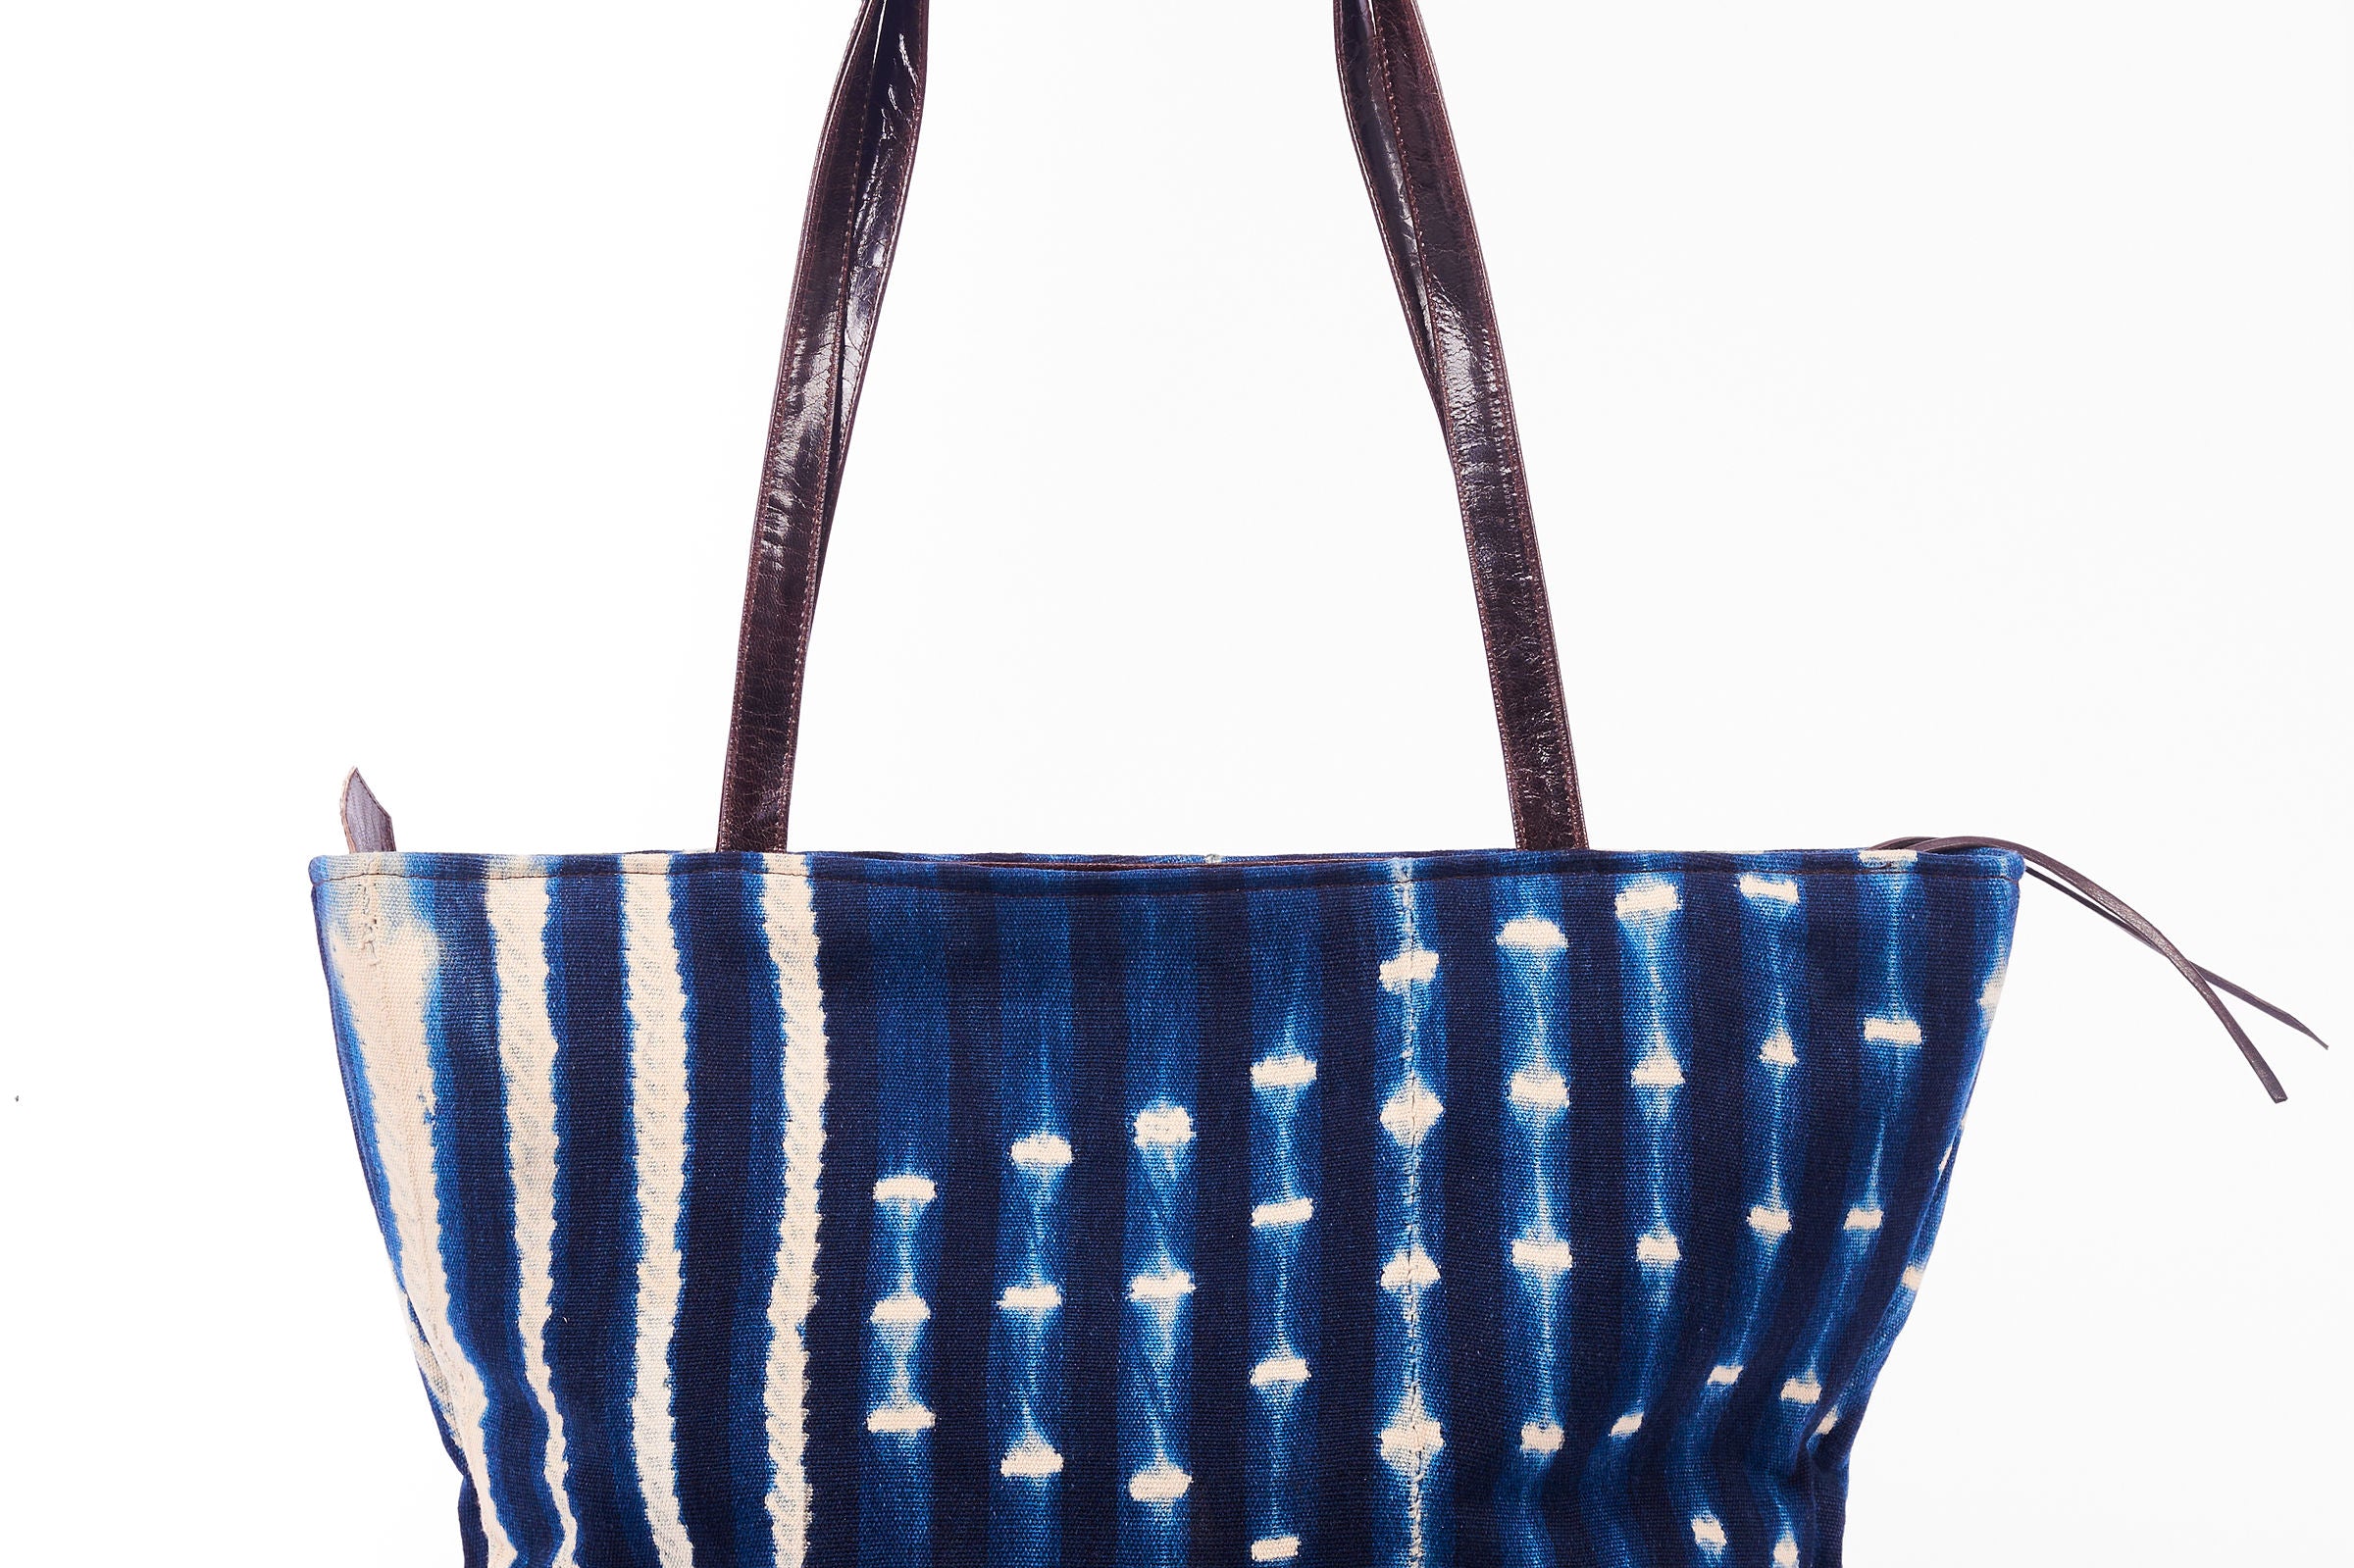 Hand-dyed indigo fabric and leather Tema tote bag by GEOMETRIC. 